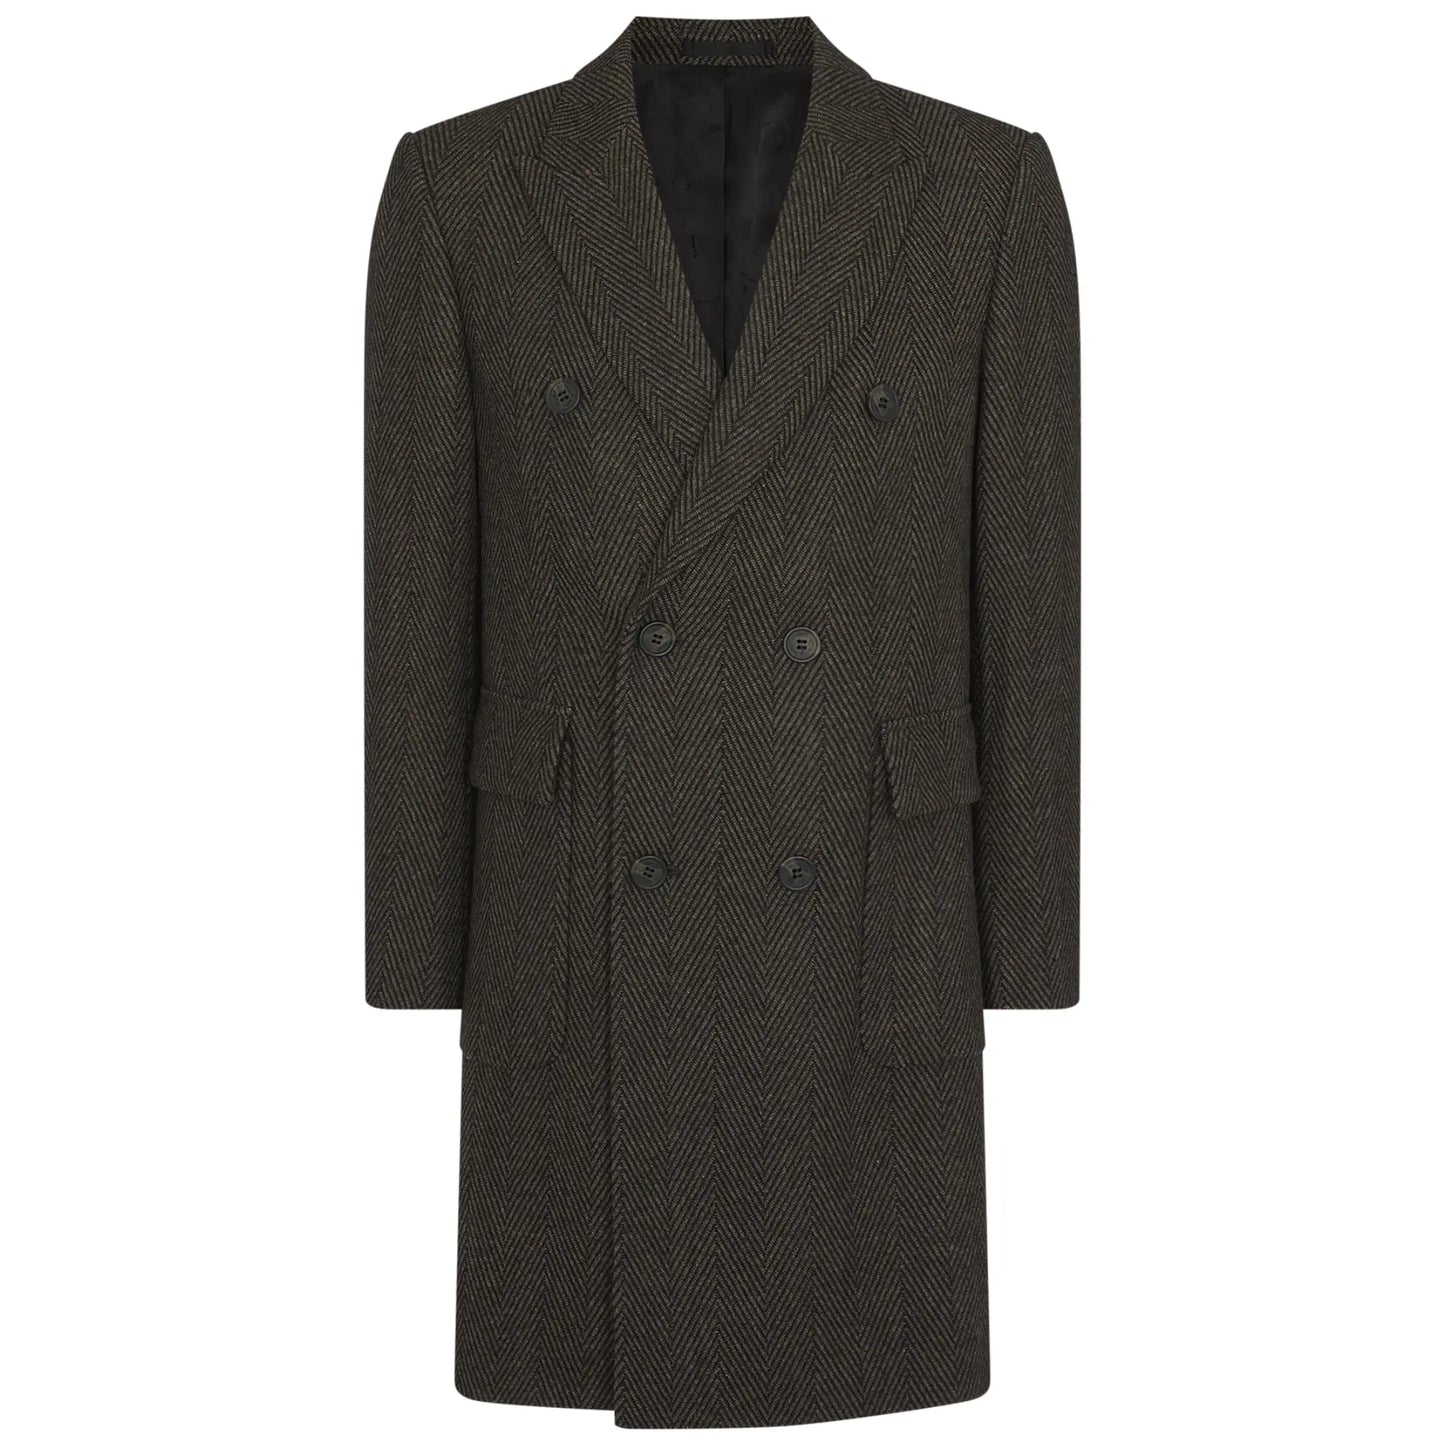 Buy Remus Uomo Brady Double Breasted Overcoat - Brown | Overcoatss at Woven Durham